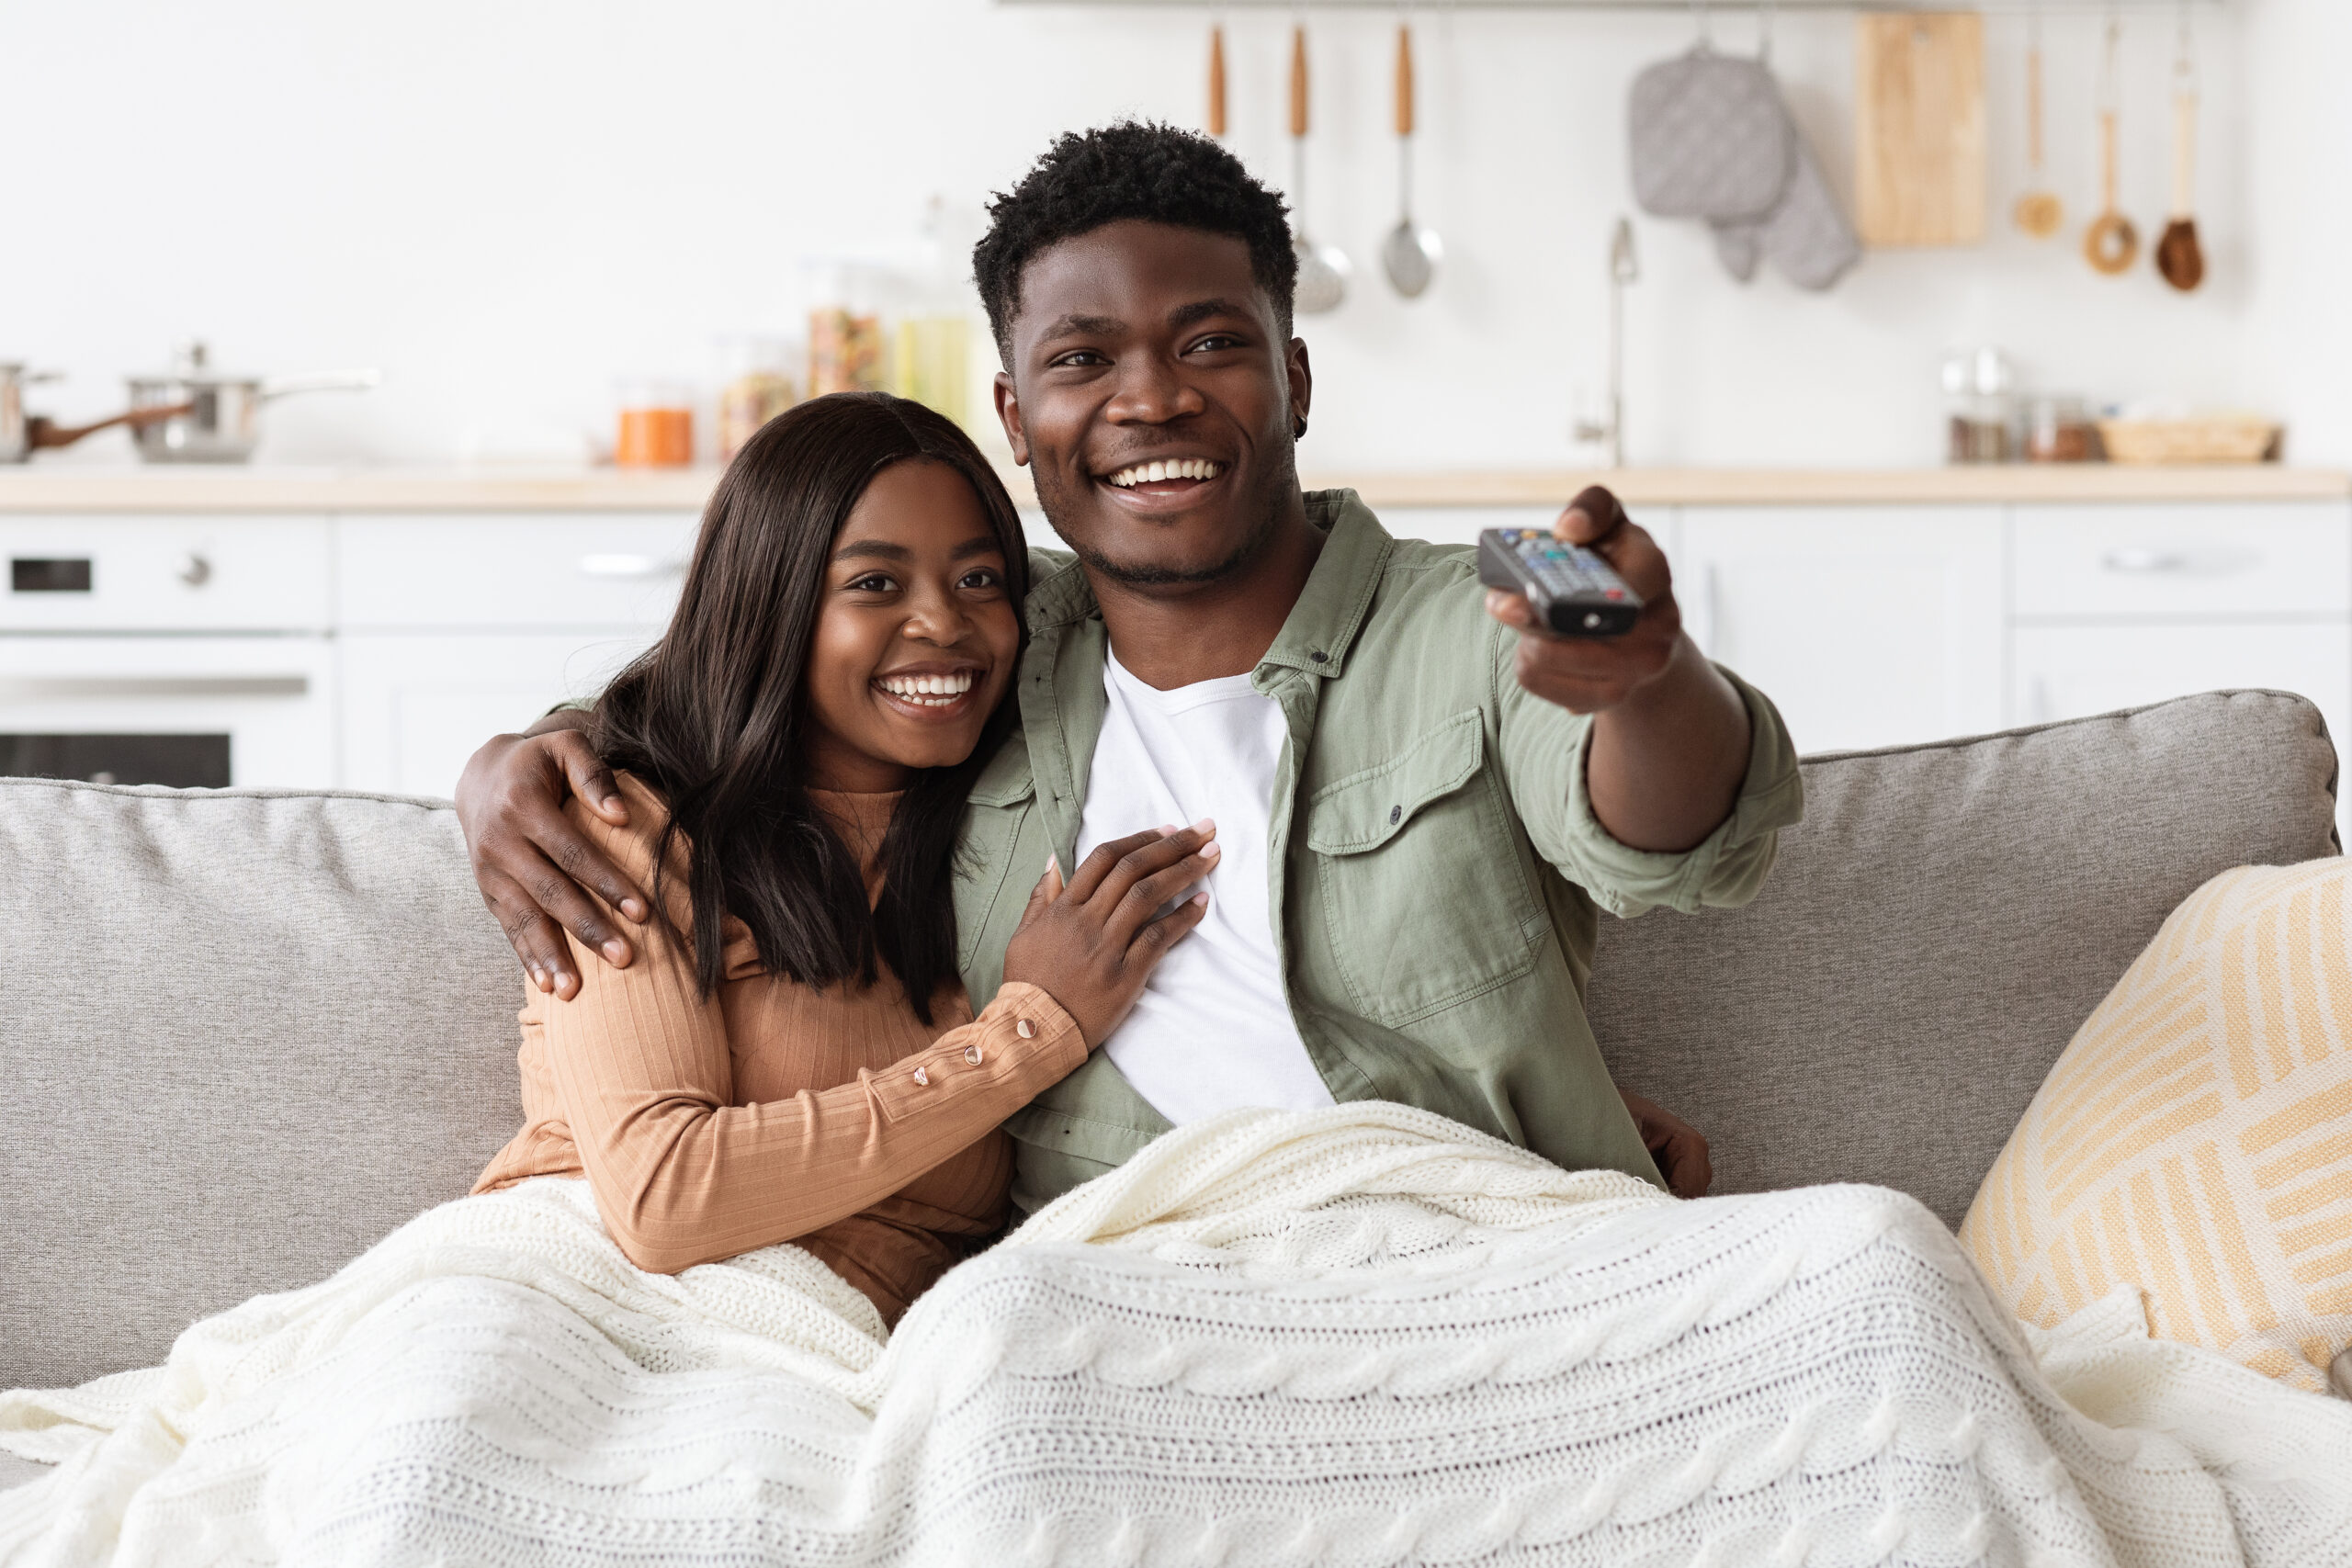 Joyful african american couple watching TV together at home, laughing and bonding, copy space. Happy young black man and woman having fun together on weekend, love and relationships concept